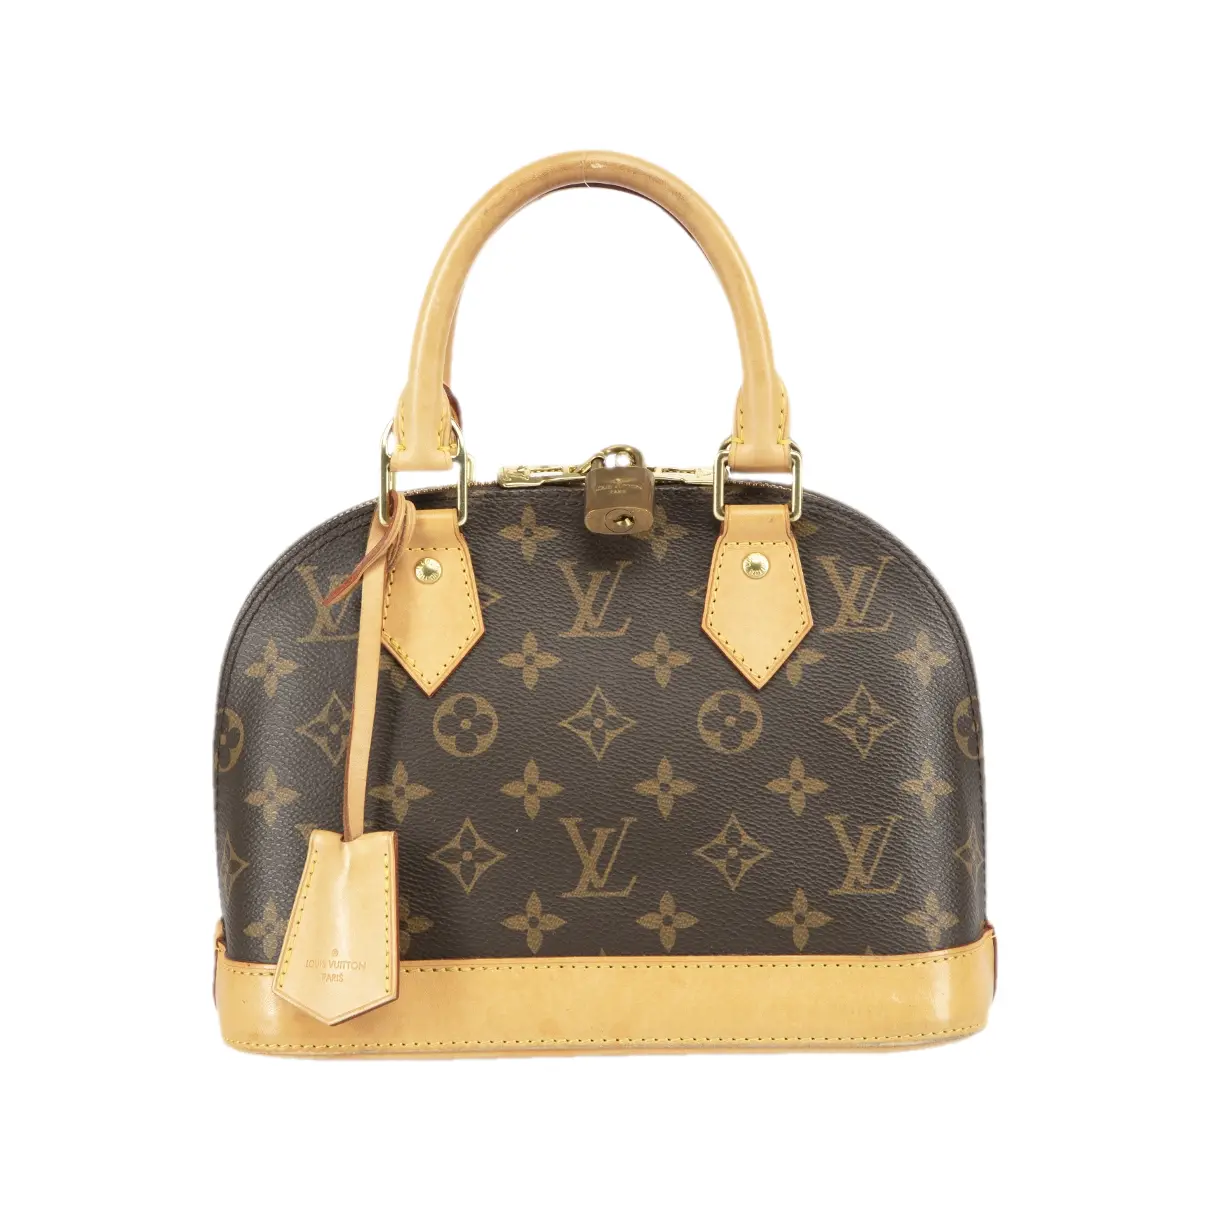 Second-hand Louis Vuitton Bags  Buy or Sell your LV Clothing! - Vestiaire  Collective